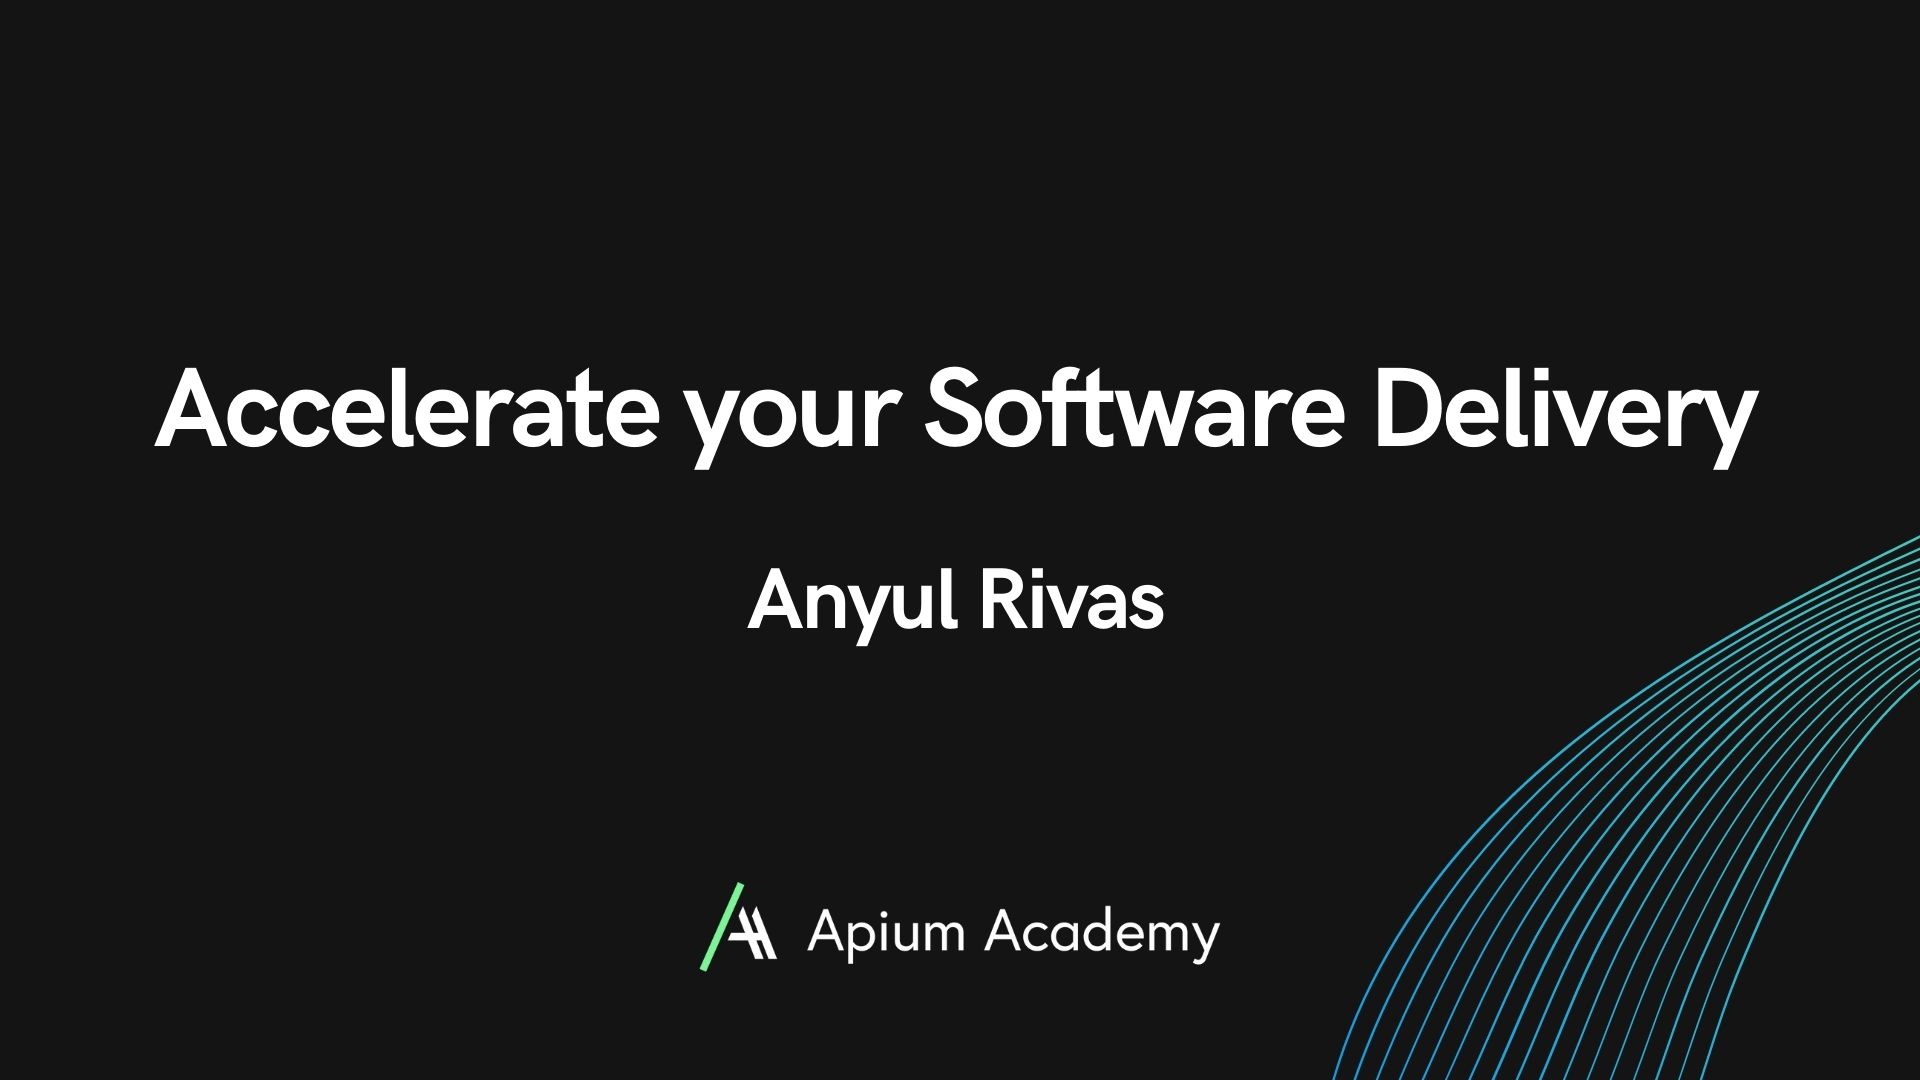 Accelerate your Software Delivery